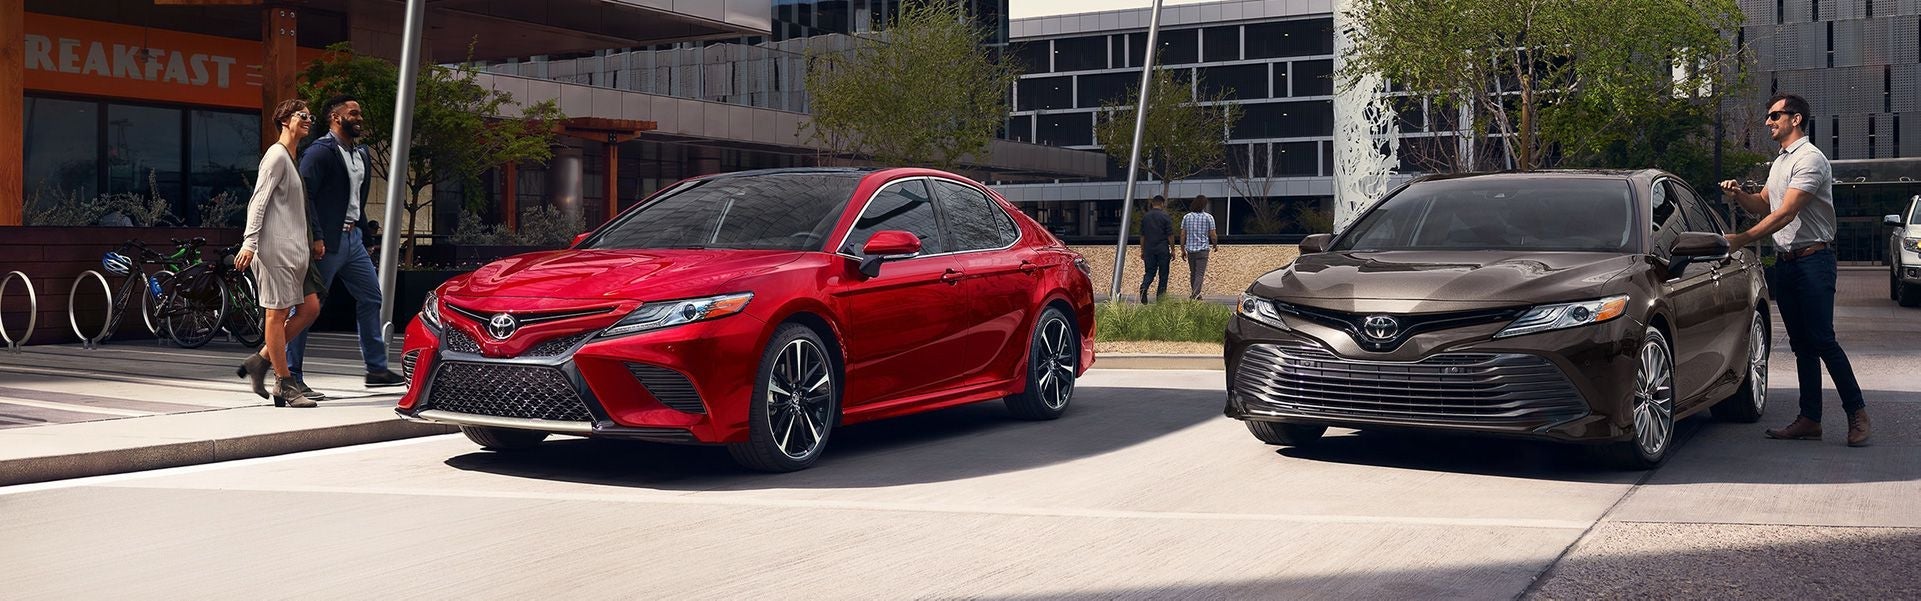 2020 Toyota Camry in Kingsport, TN - Toyota of Kingsport